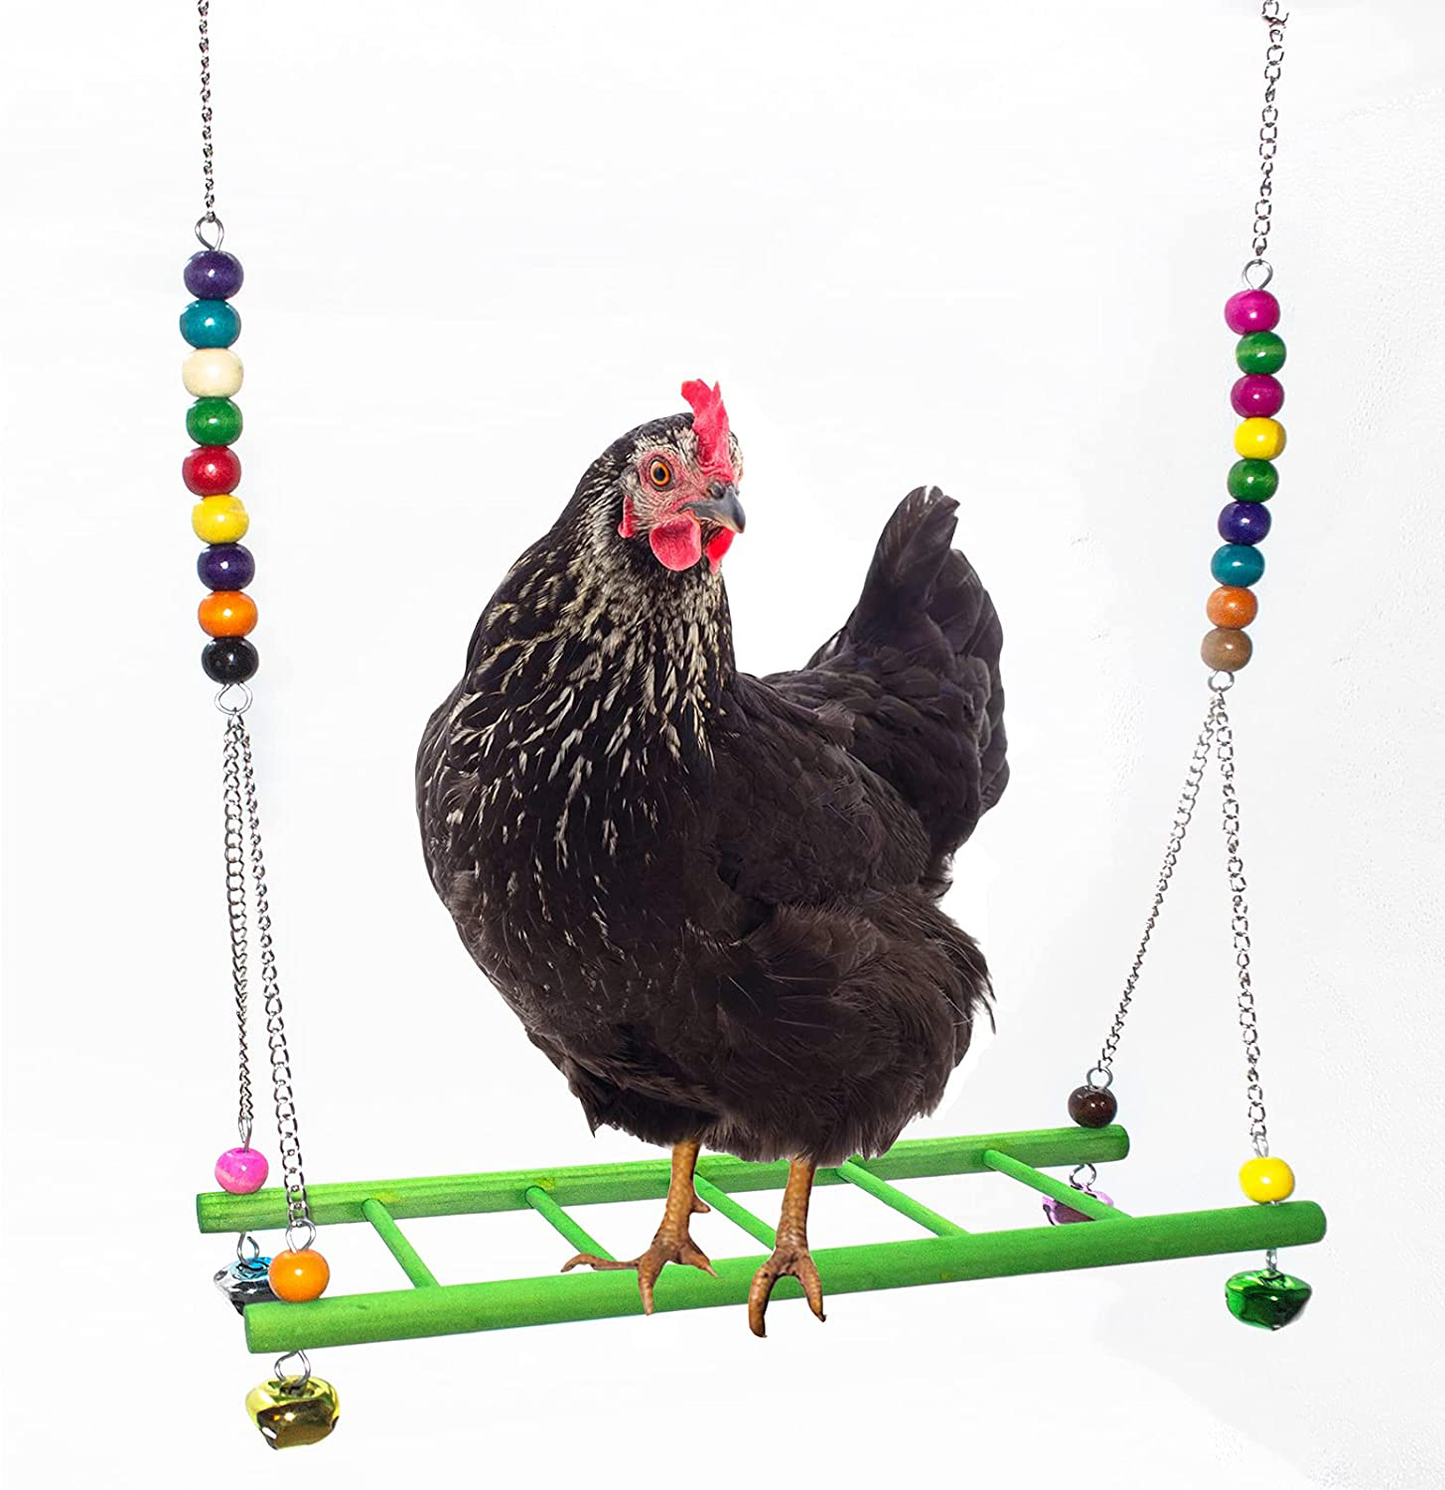 Duvindd Chicken Toys Coop Chicken Swing Toy for Hens Solid Wooden Chicken Perch Roosting Bar Stand Chicken Coop Accessories for Birds Poultry Rooster Chicks